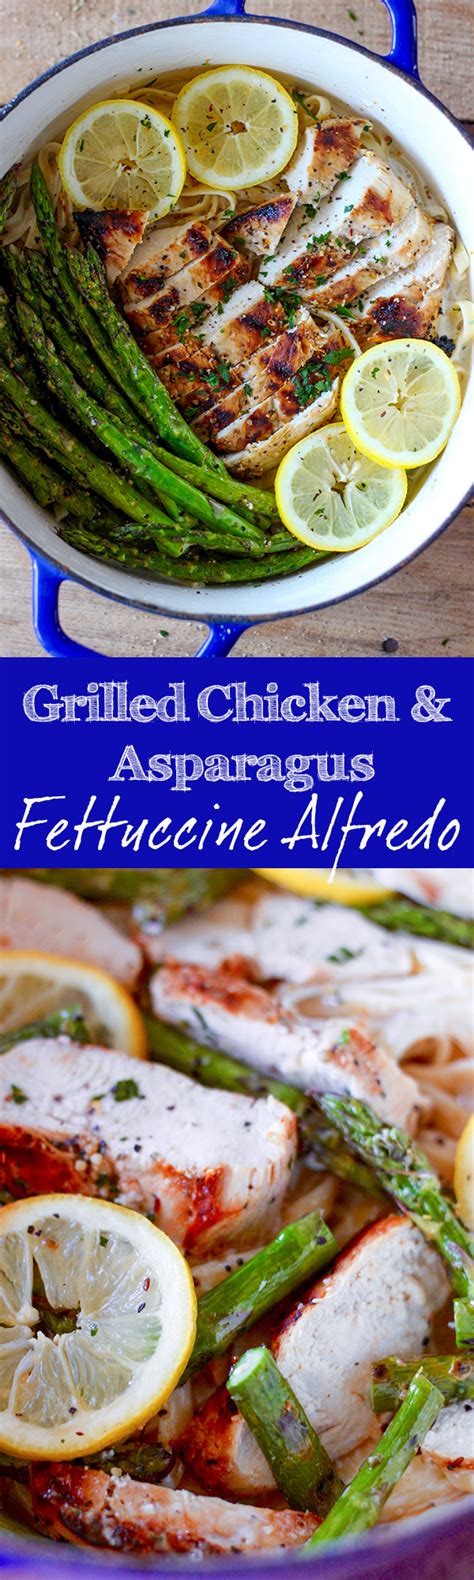 Grilled Chicken and Asparagus Fettuccine Alfredo - No. 2 Pencil